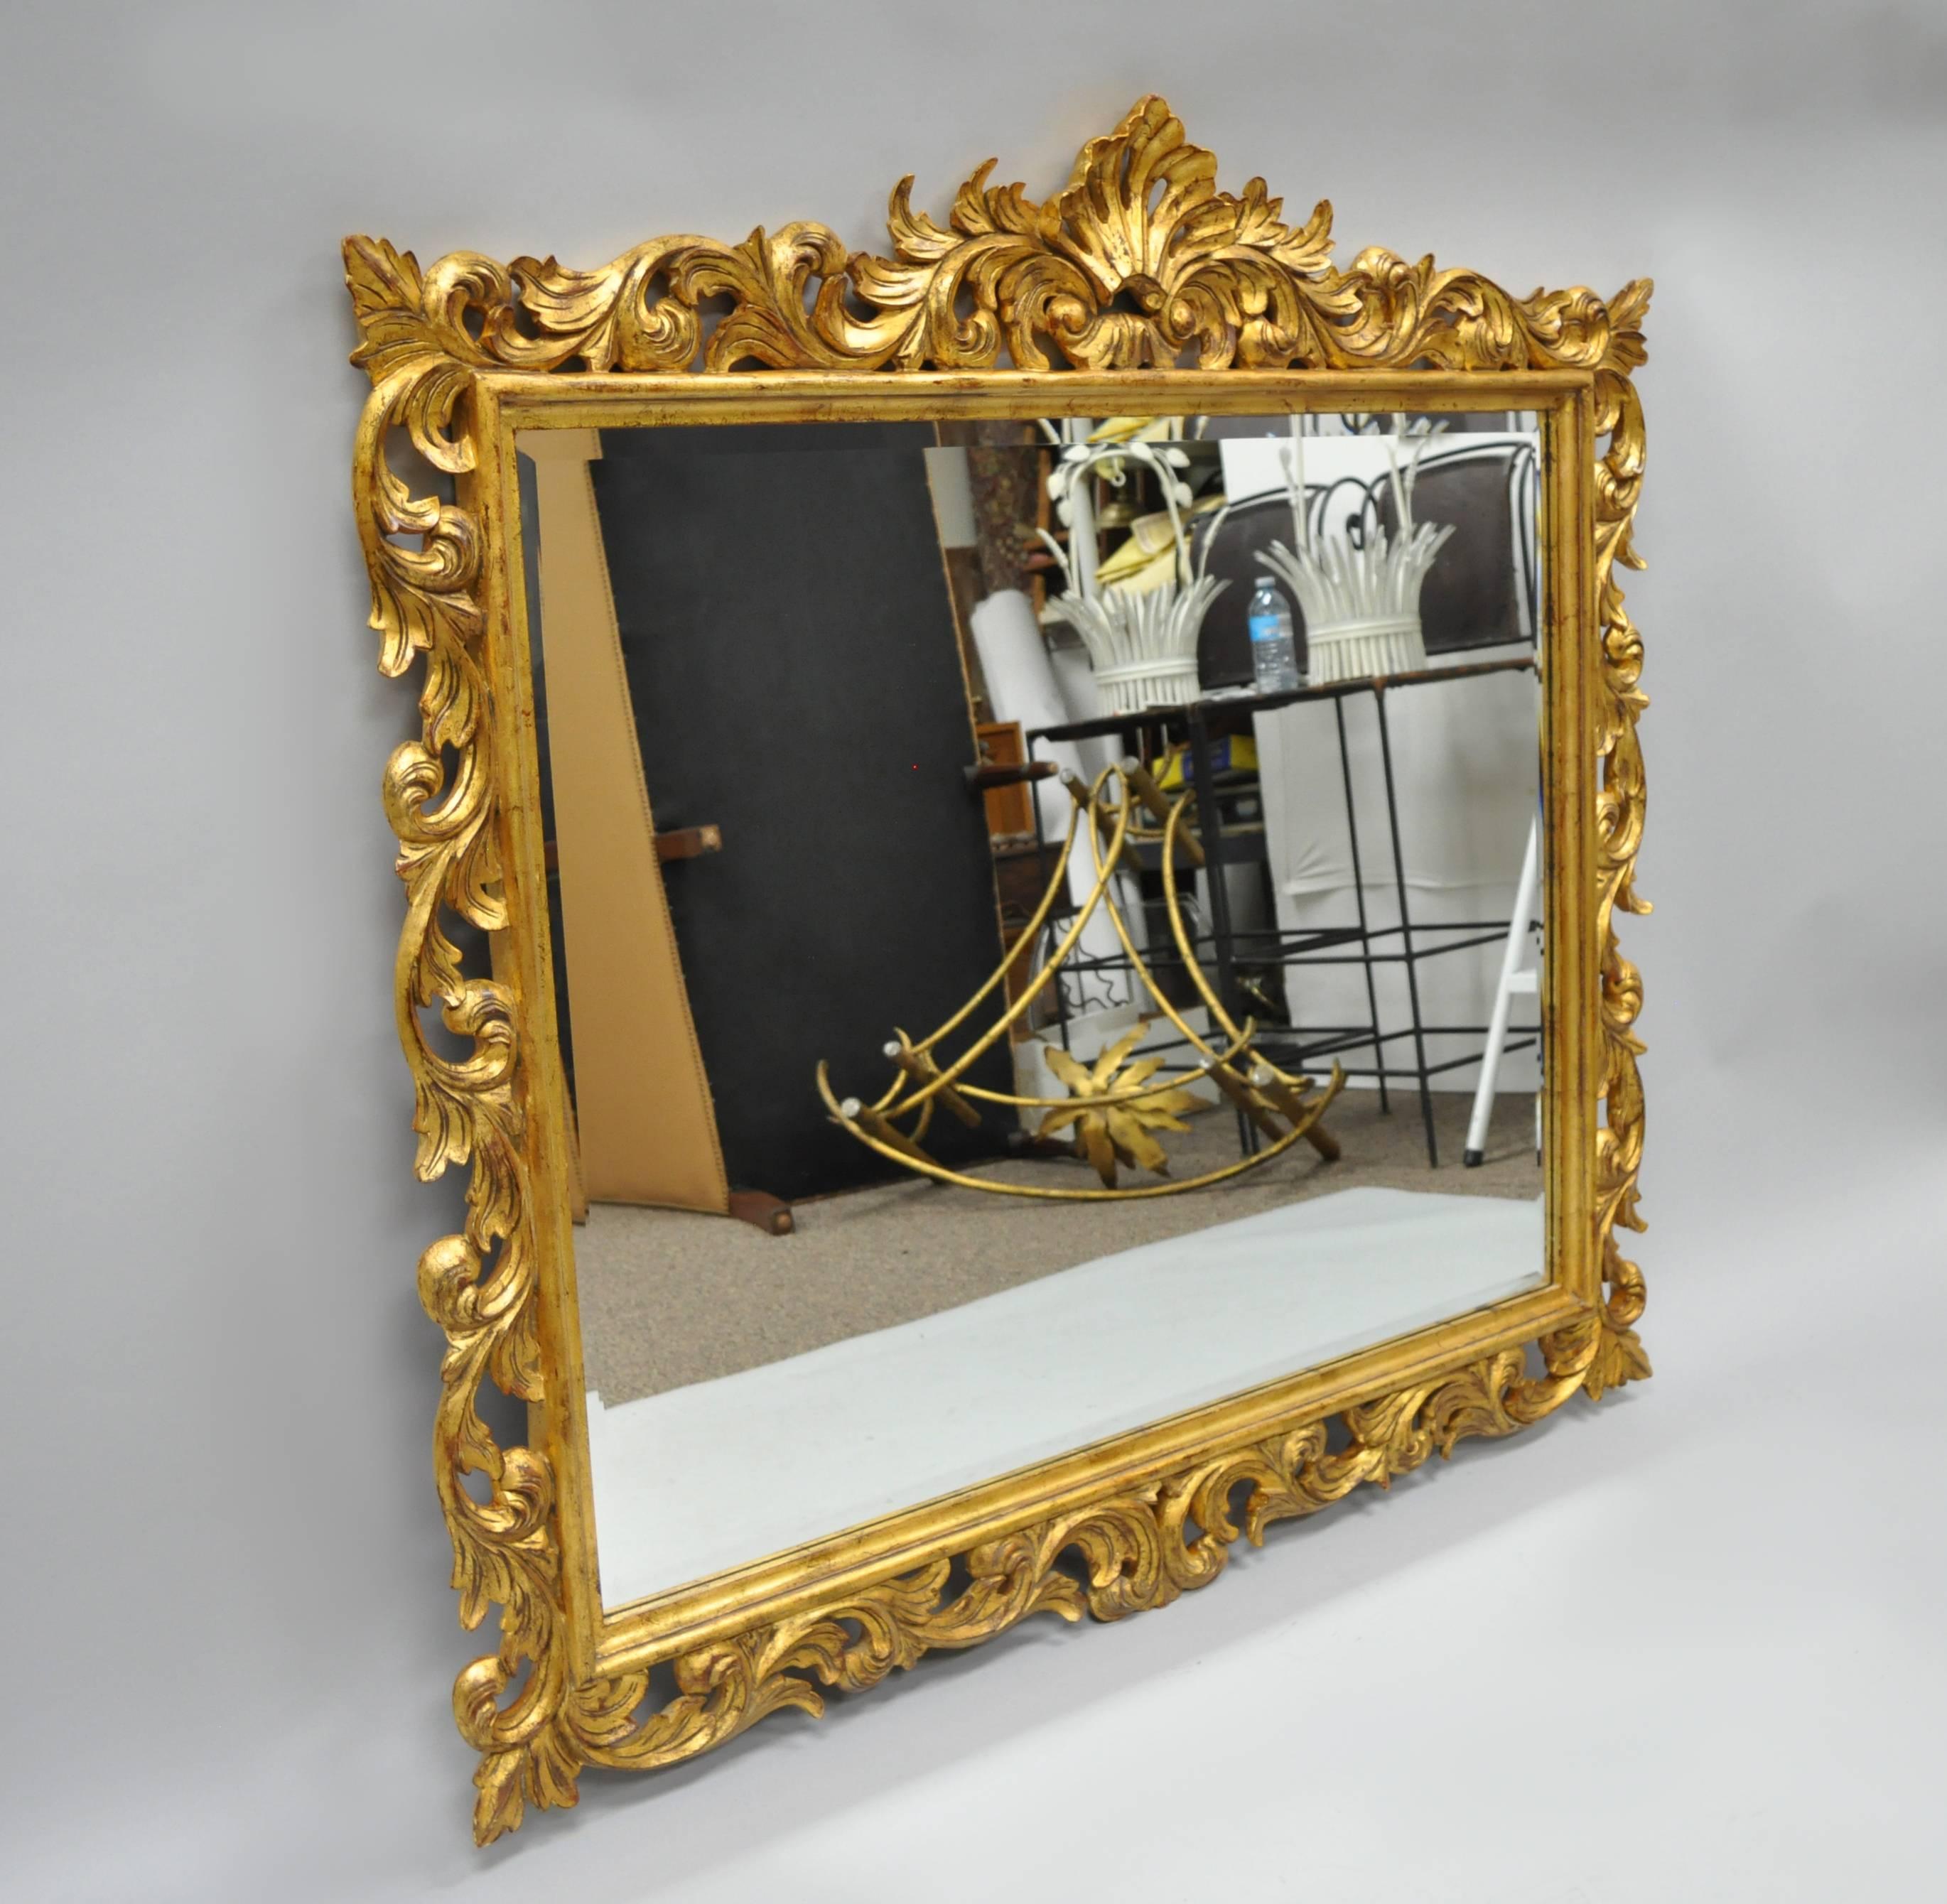 Harrison & Gil Dauphine Large Gold Giltwood Italian Baroque French Style Mirror 3